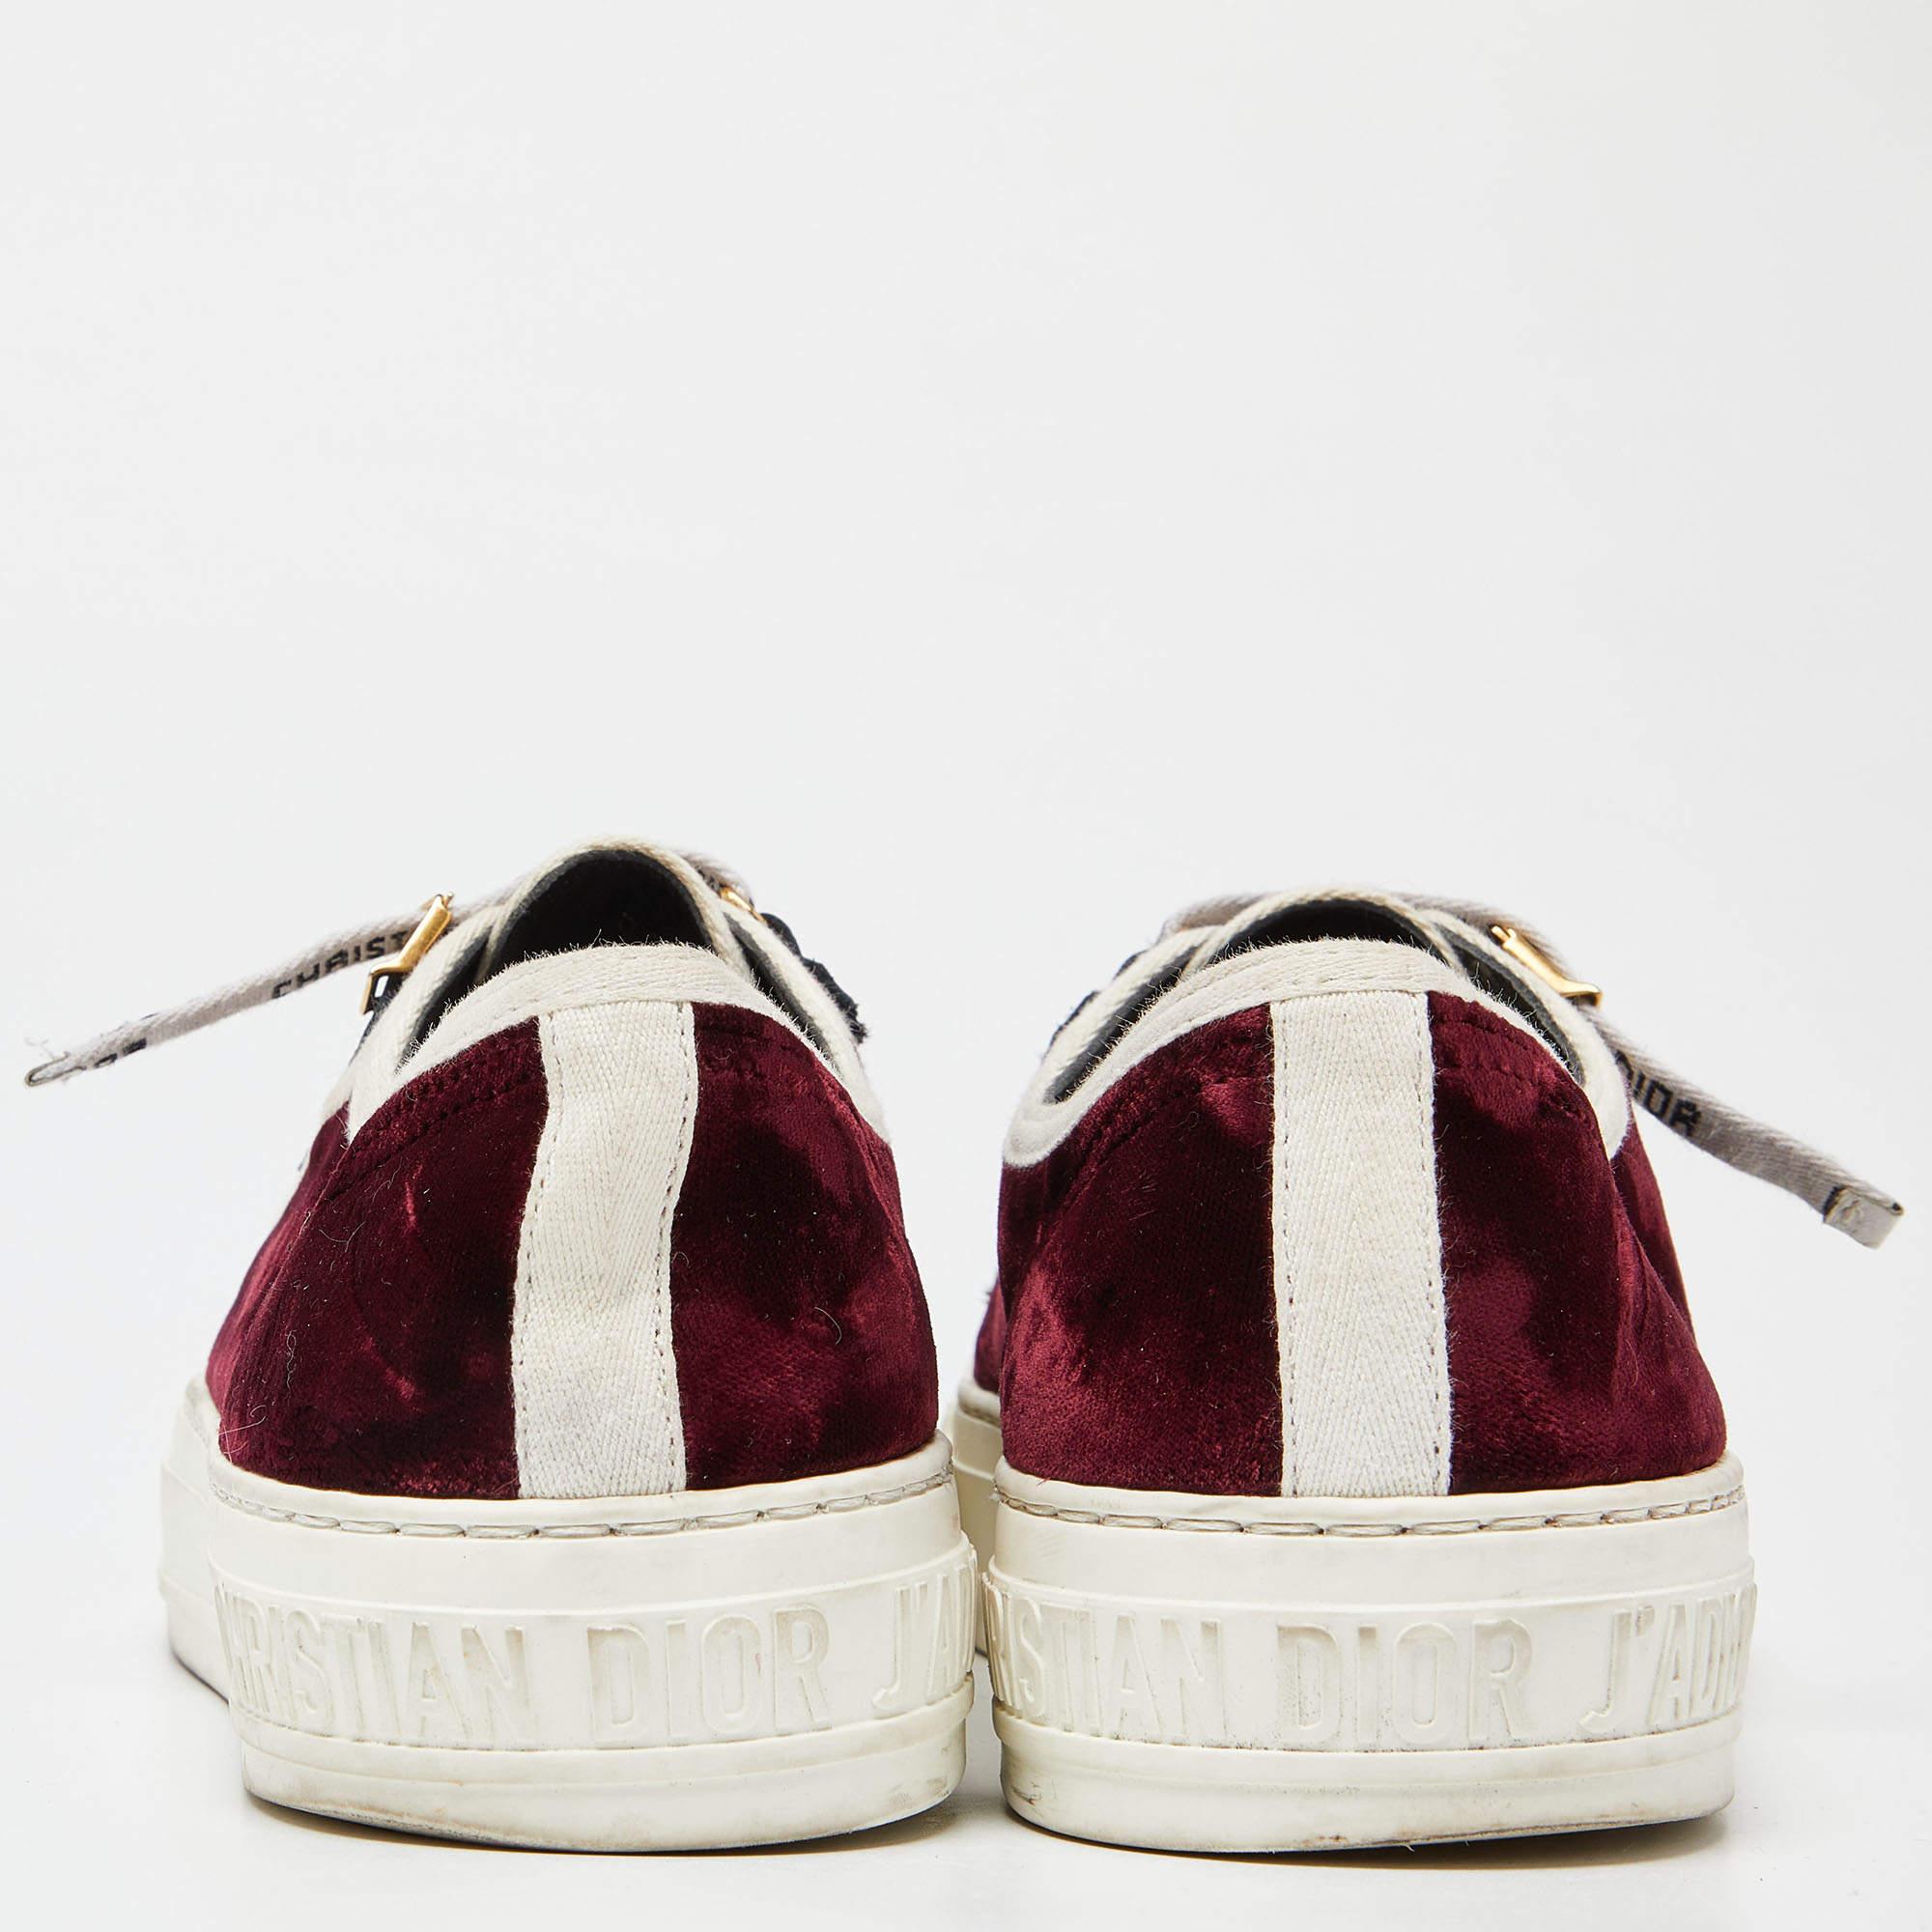 Dior Burgundy/White Velvet and Rubber Walk'n'Dior Sneakers Size 38.5 2